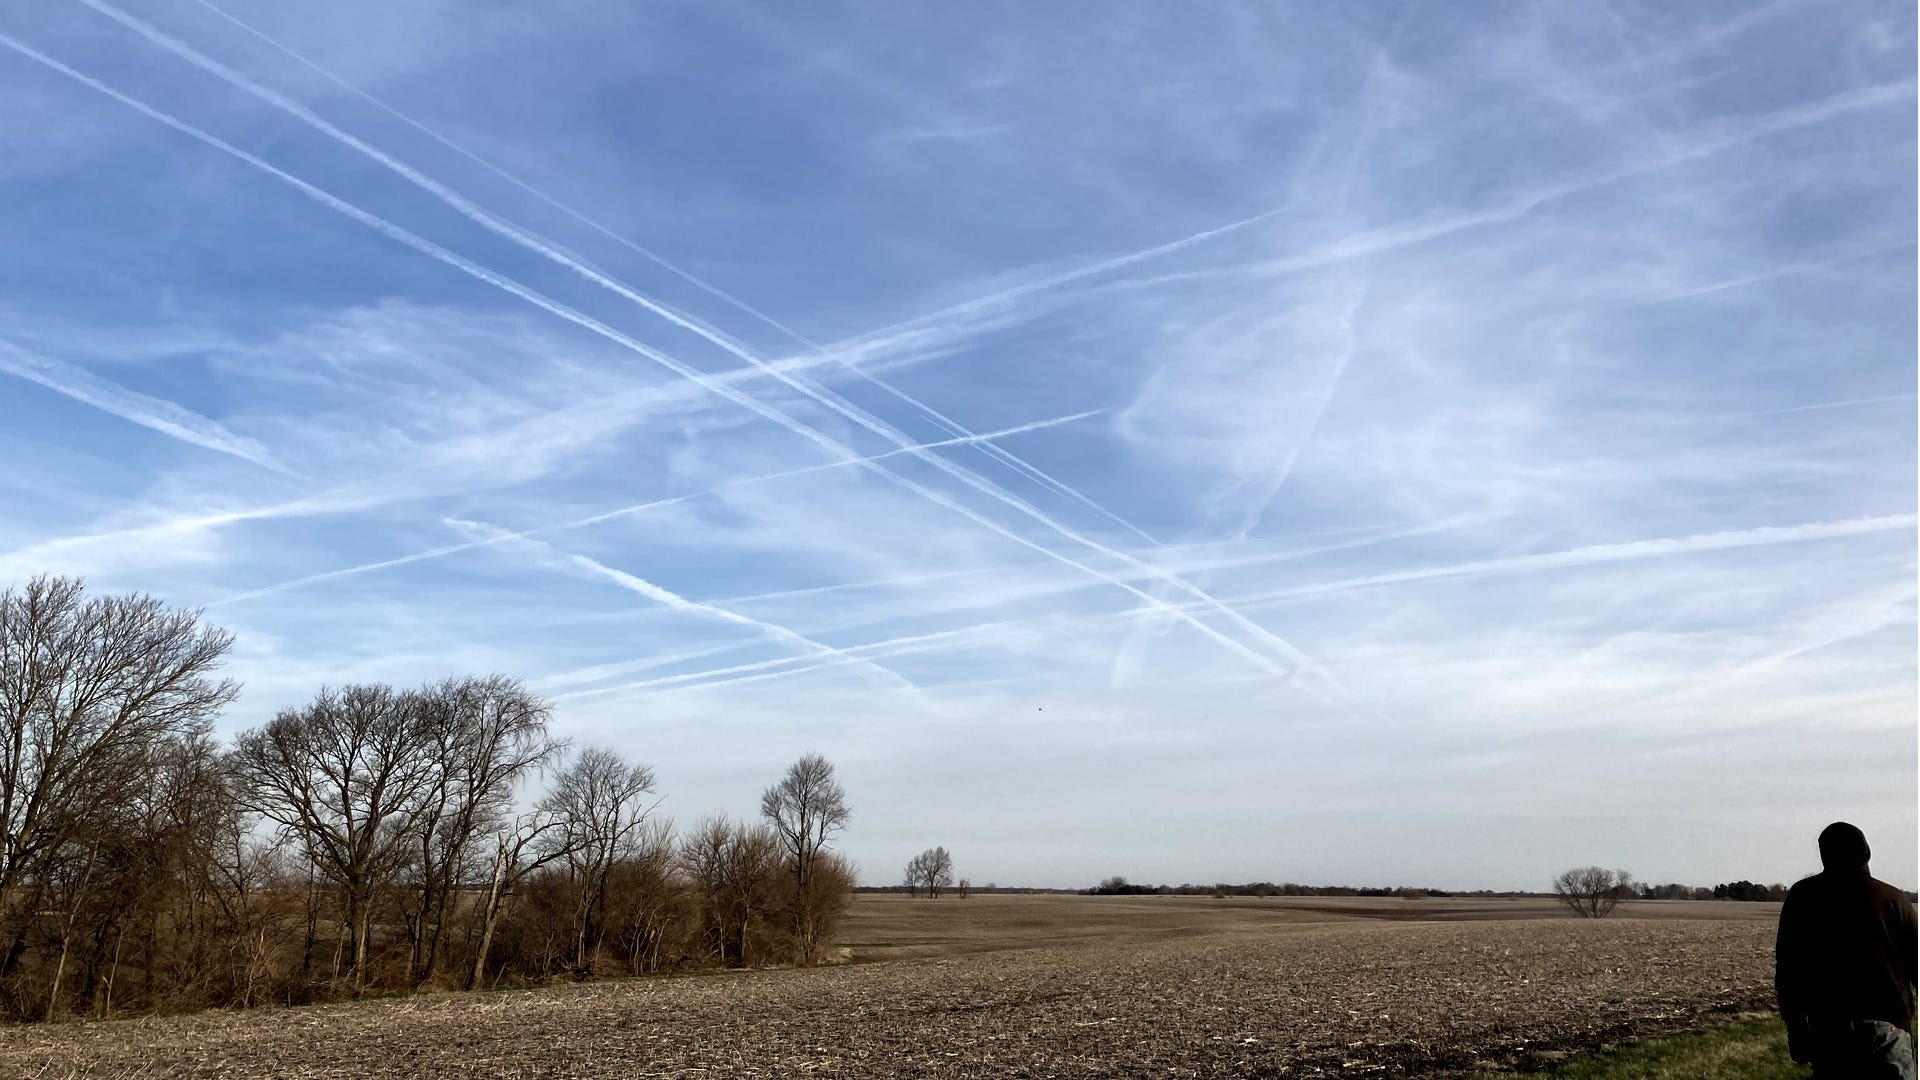  Will the Mass Poisoning of Our Skies Cause a Killing Field Effect? Https%3A%2F%2Fsubstack-post-media.s3.amazonaws.com%2Fpublic%2Fimages%2F142eb071-8164-4c0b-887d-bcdbe714088a_1920x1080